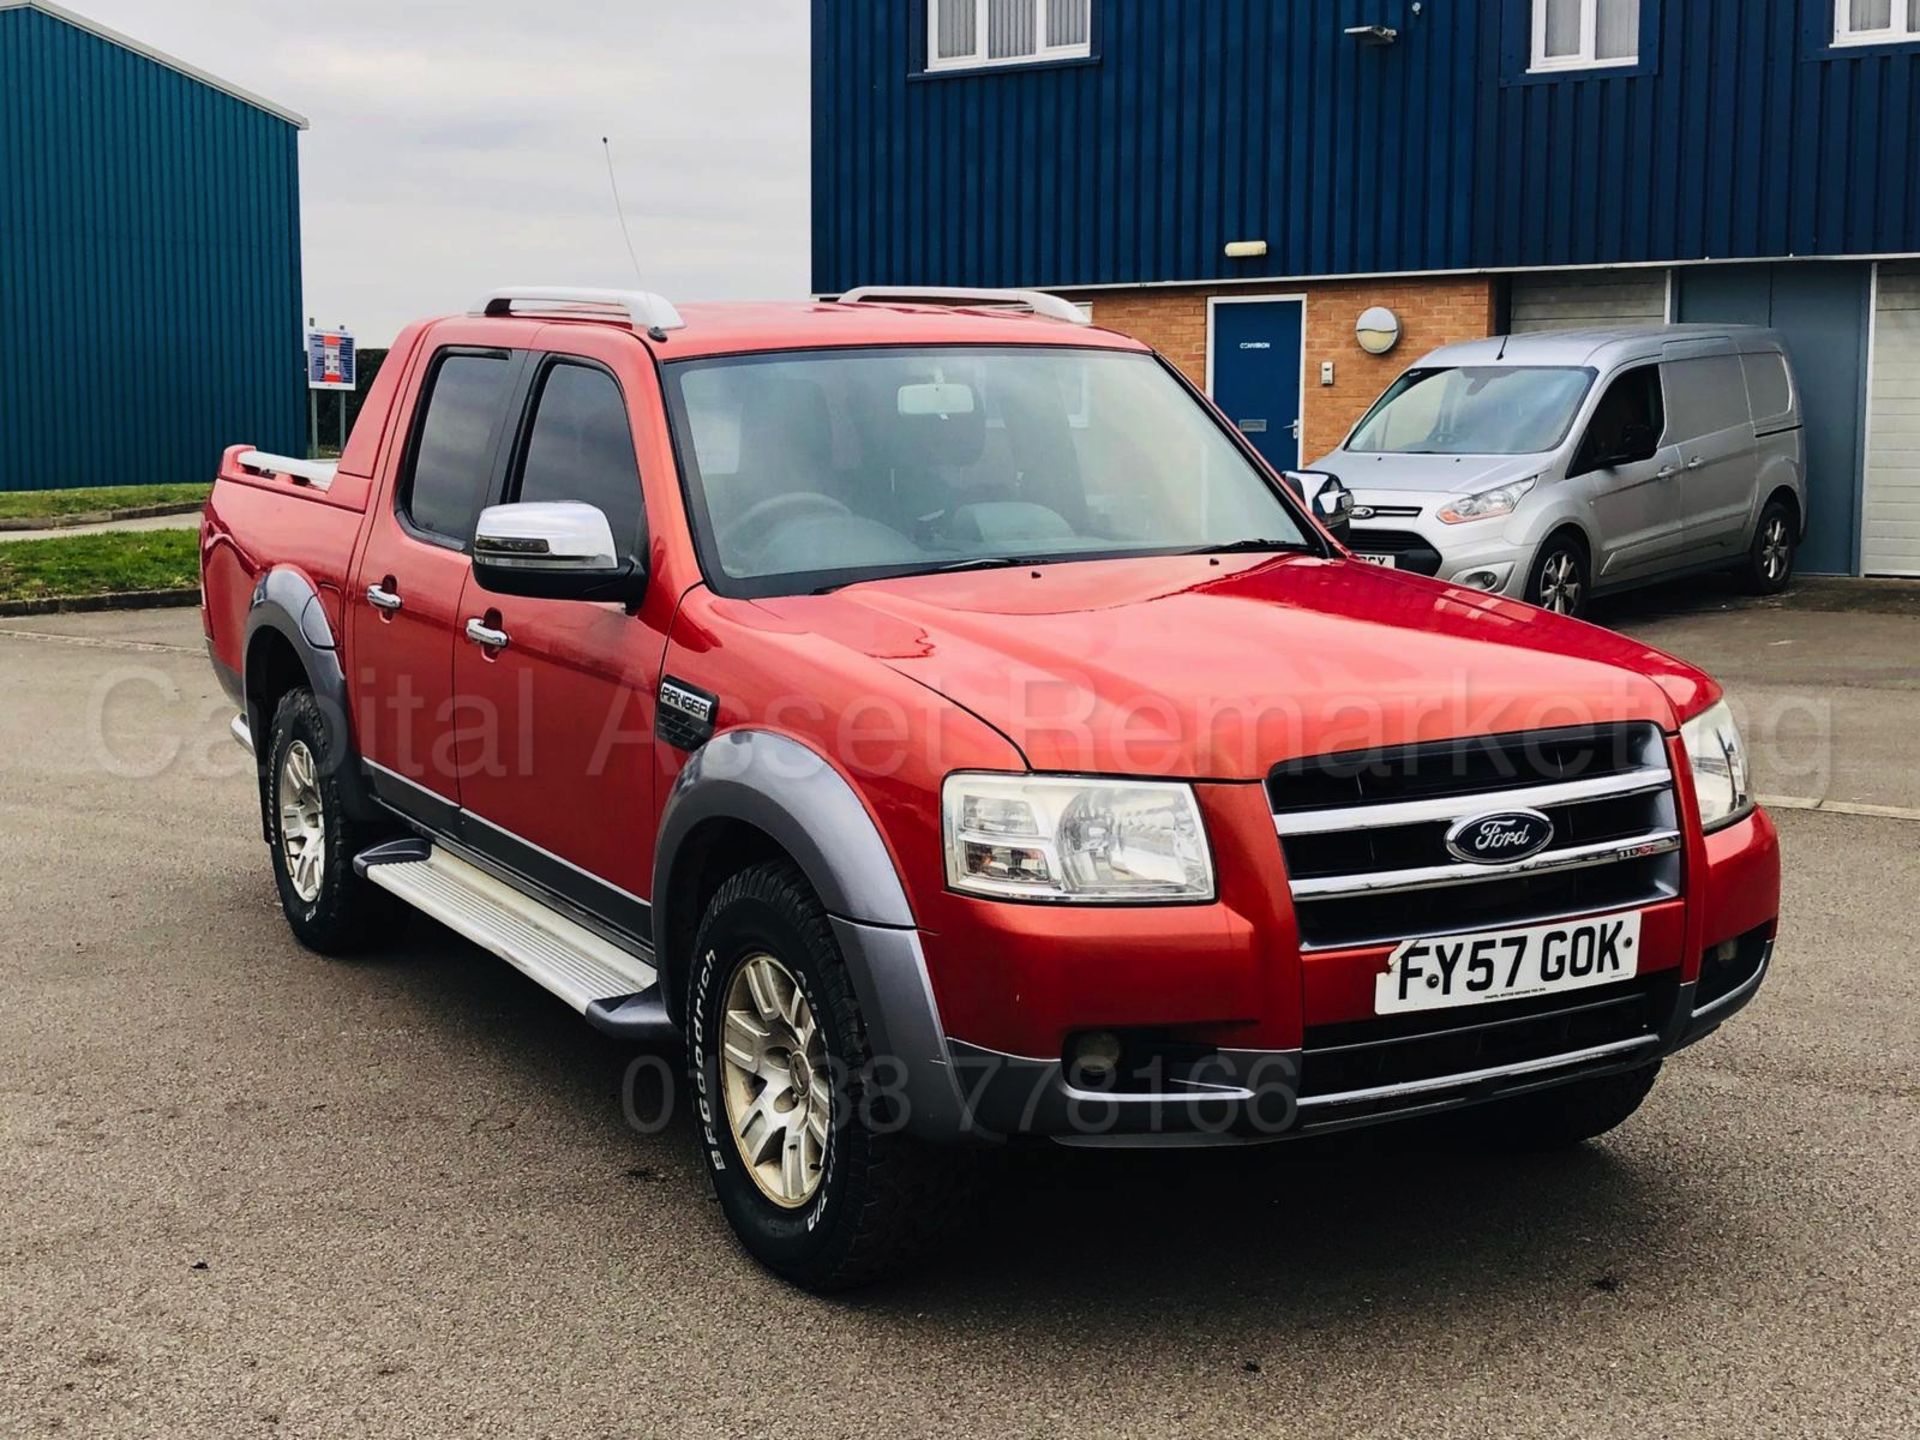 (On Sale) FORD RANGER *WILDTRAK EDITION* D/CAB PICK-UP (57 REG) '3.0 TDCI - 5 SPEED' **AIR CON** - Image 2 of 26